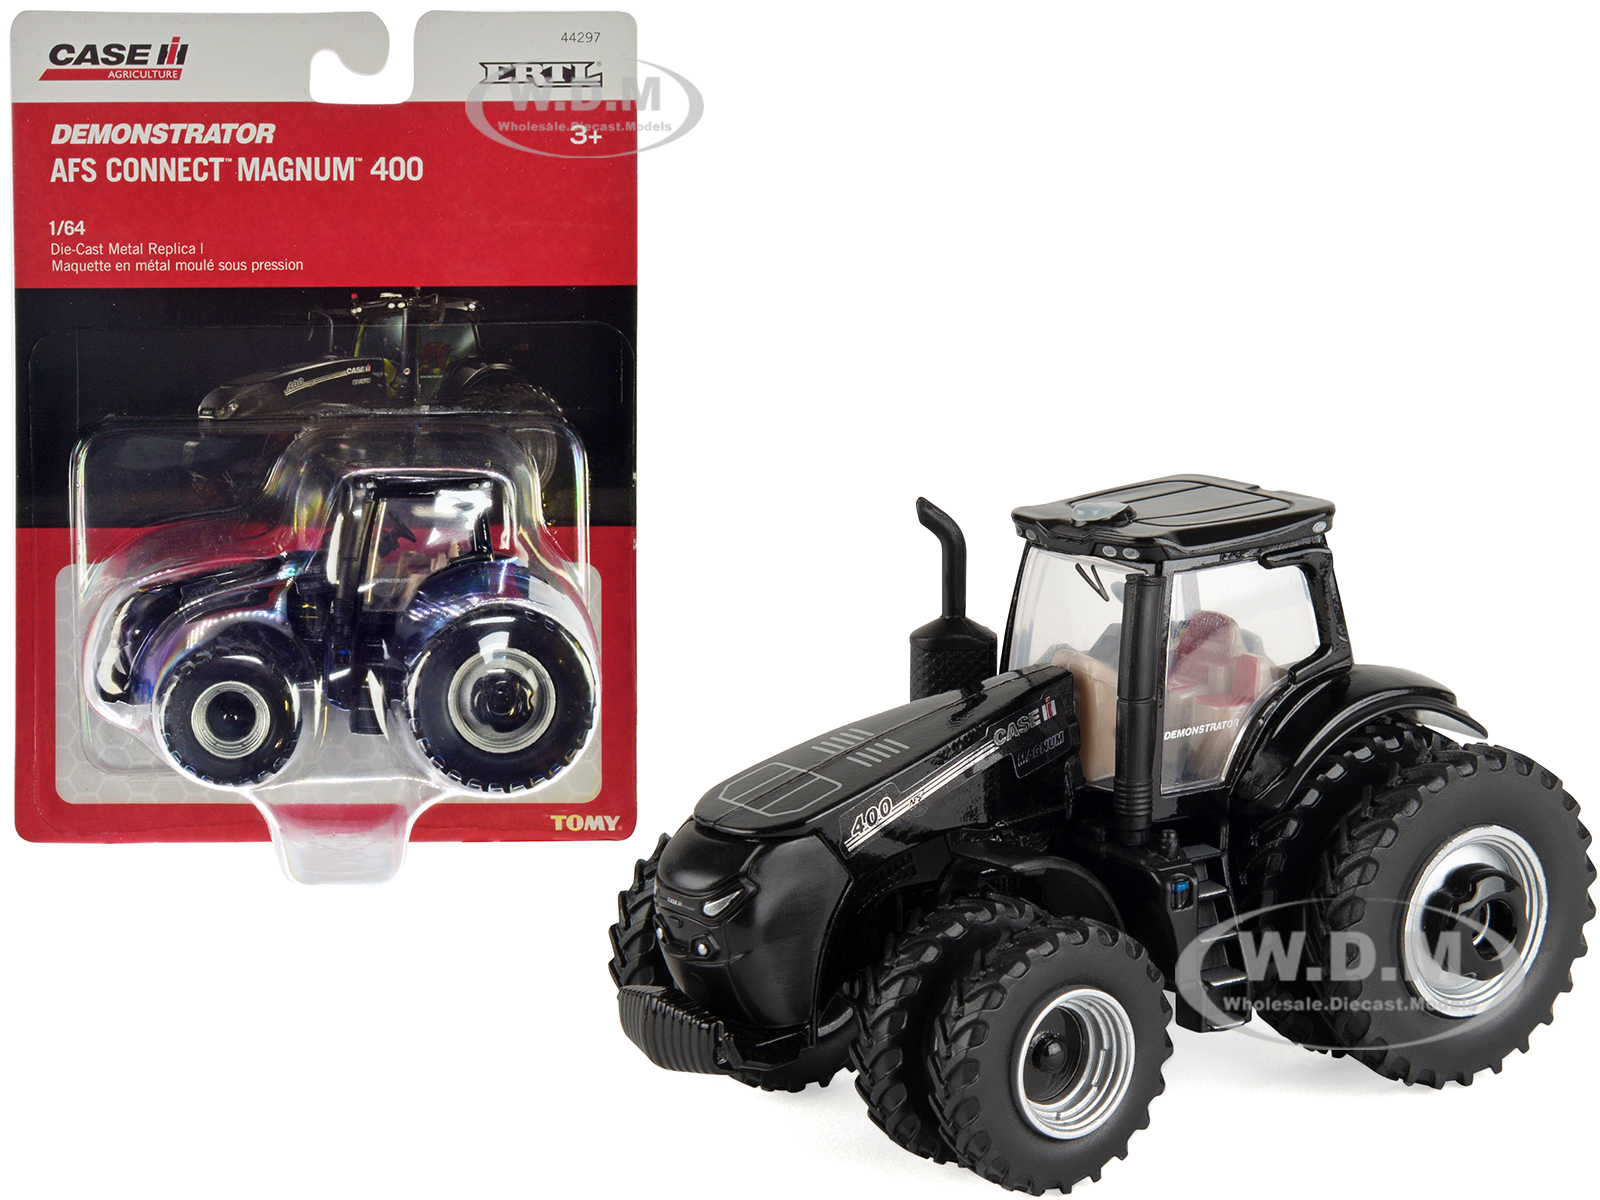 Case IH AFS Connect Magnum 400 "Demonstrator" Tractor Black with Dual Wheels "Case IH Agriculture" 1/64 Diecast Model by ERTL TOMY